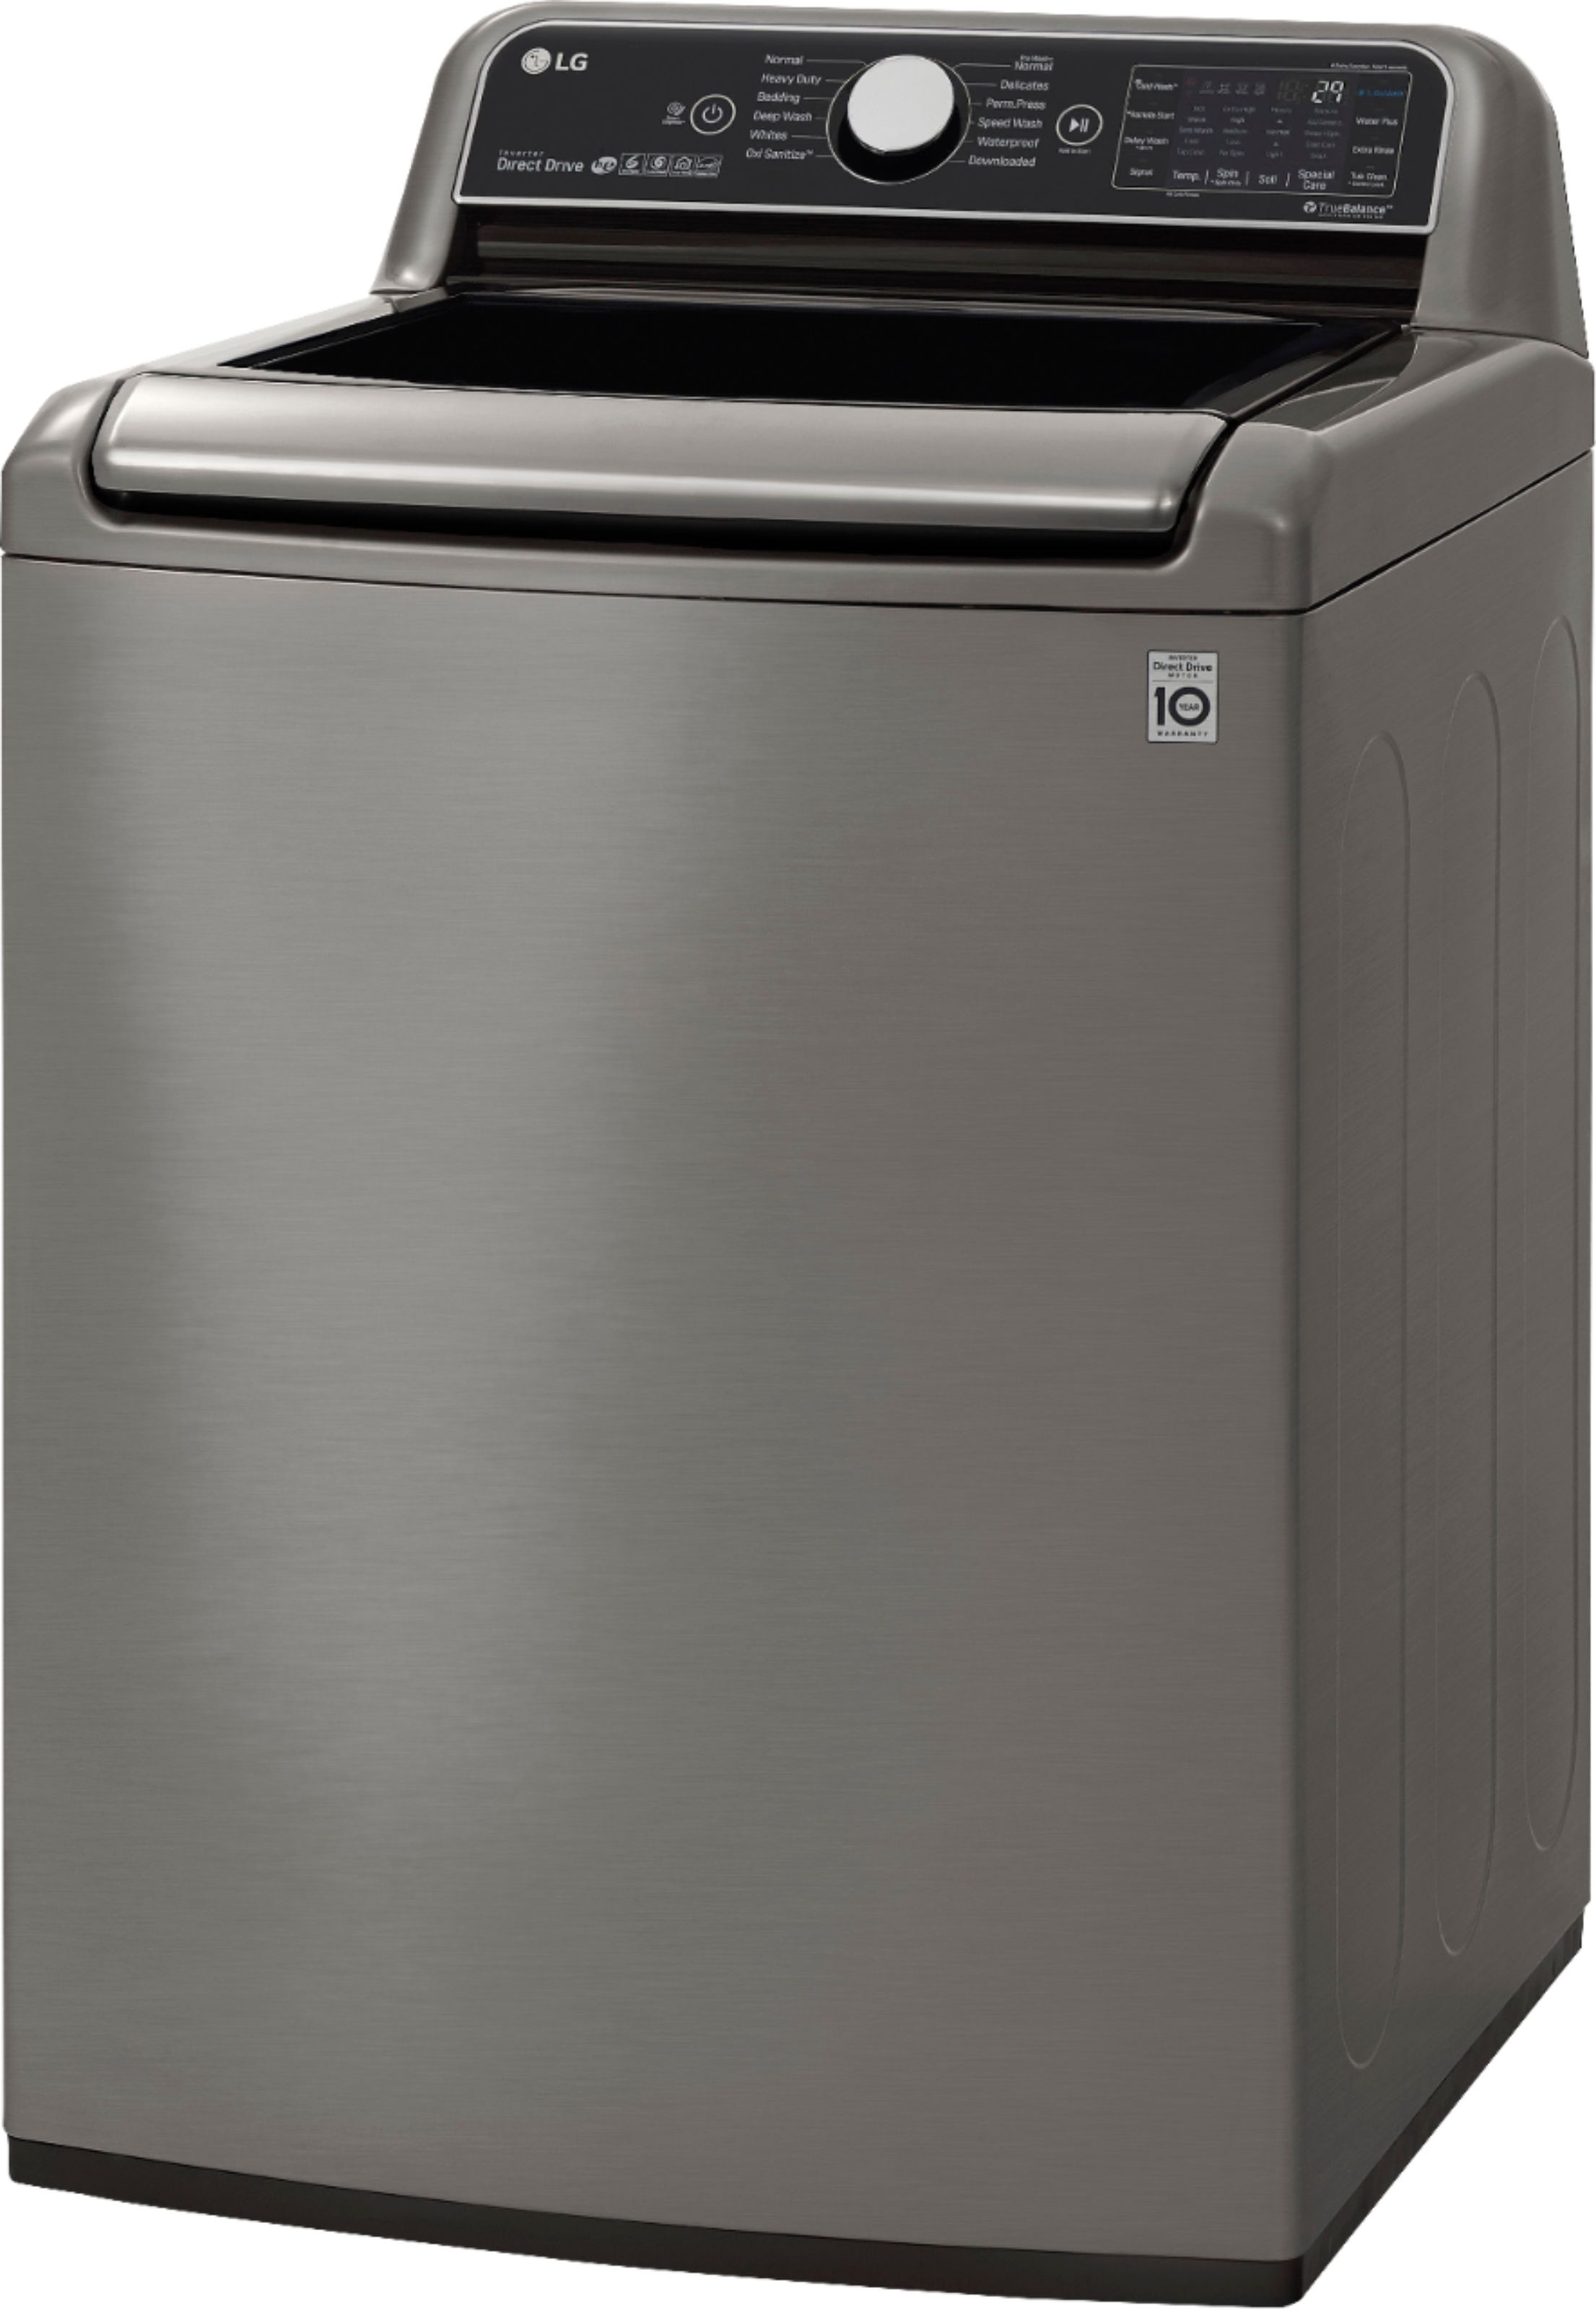 Left View: LG - 5.5 Cu. Ft. High-Efficiency Smart Top Load Washer with TurboWash3D Technology - Graphite Steel